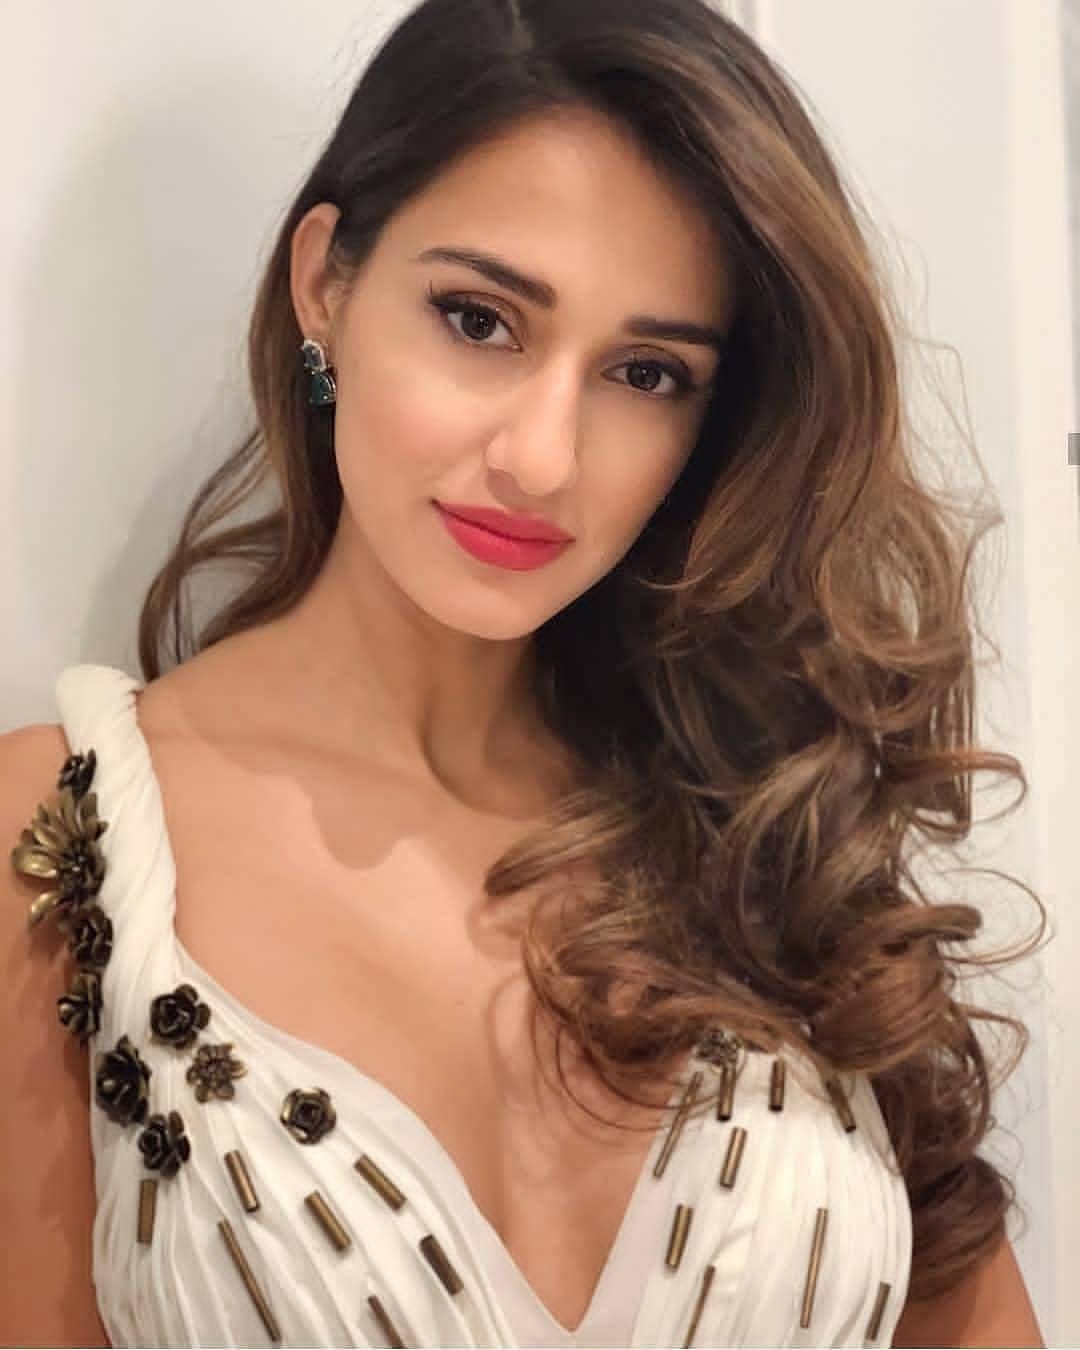 Disha Patani's flawless complexion and captivating eyes